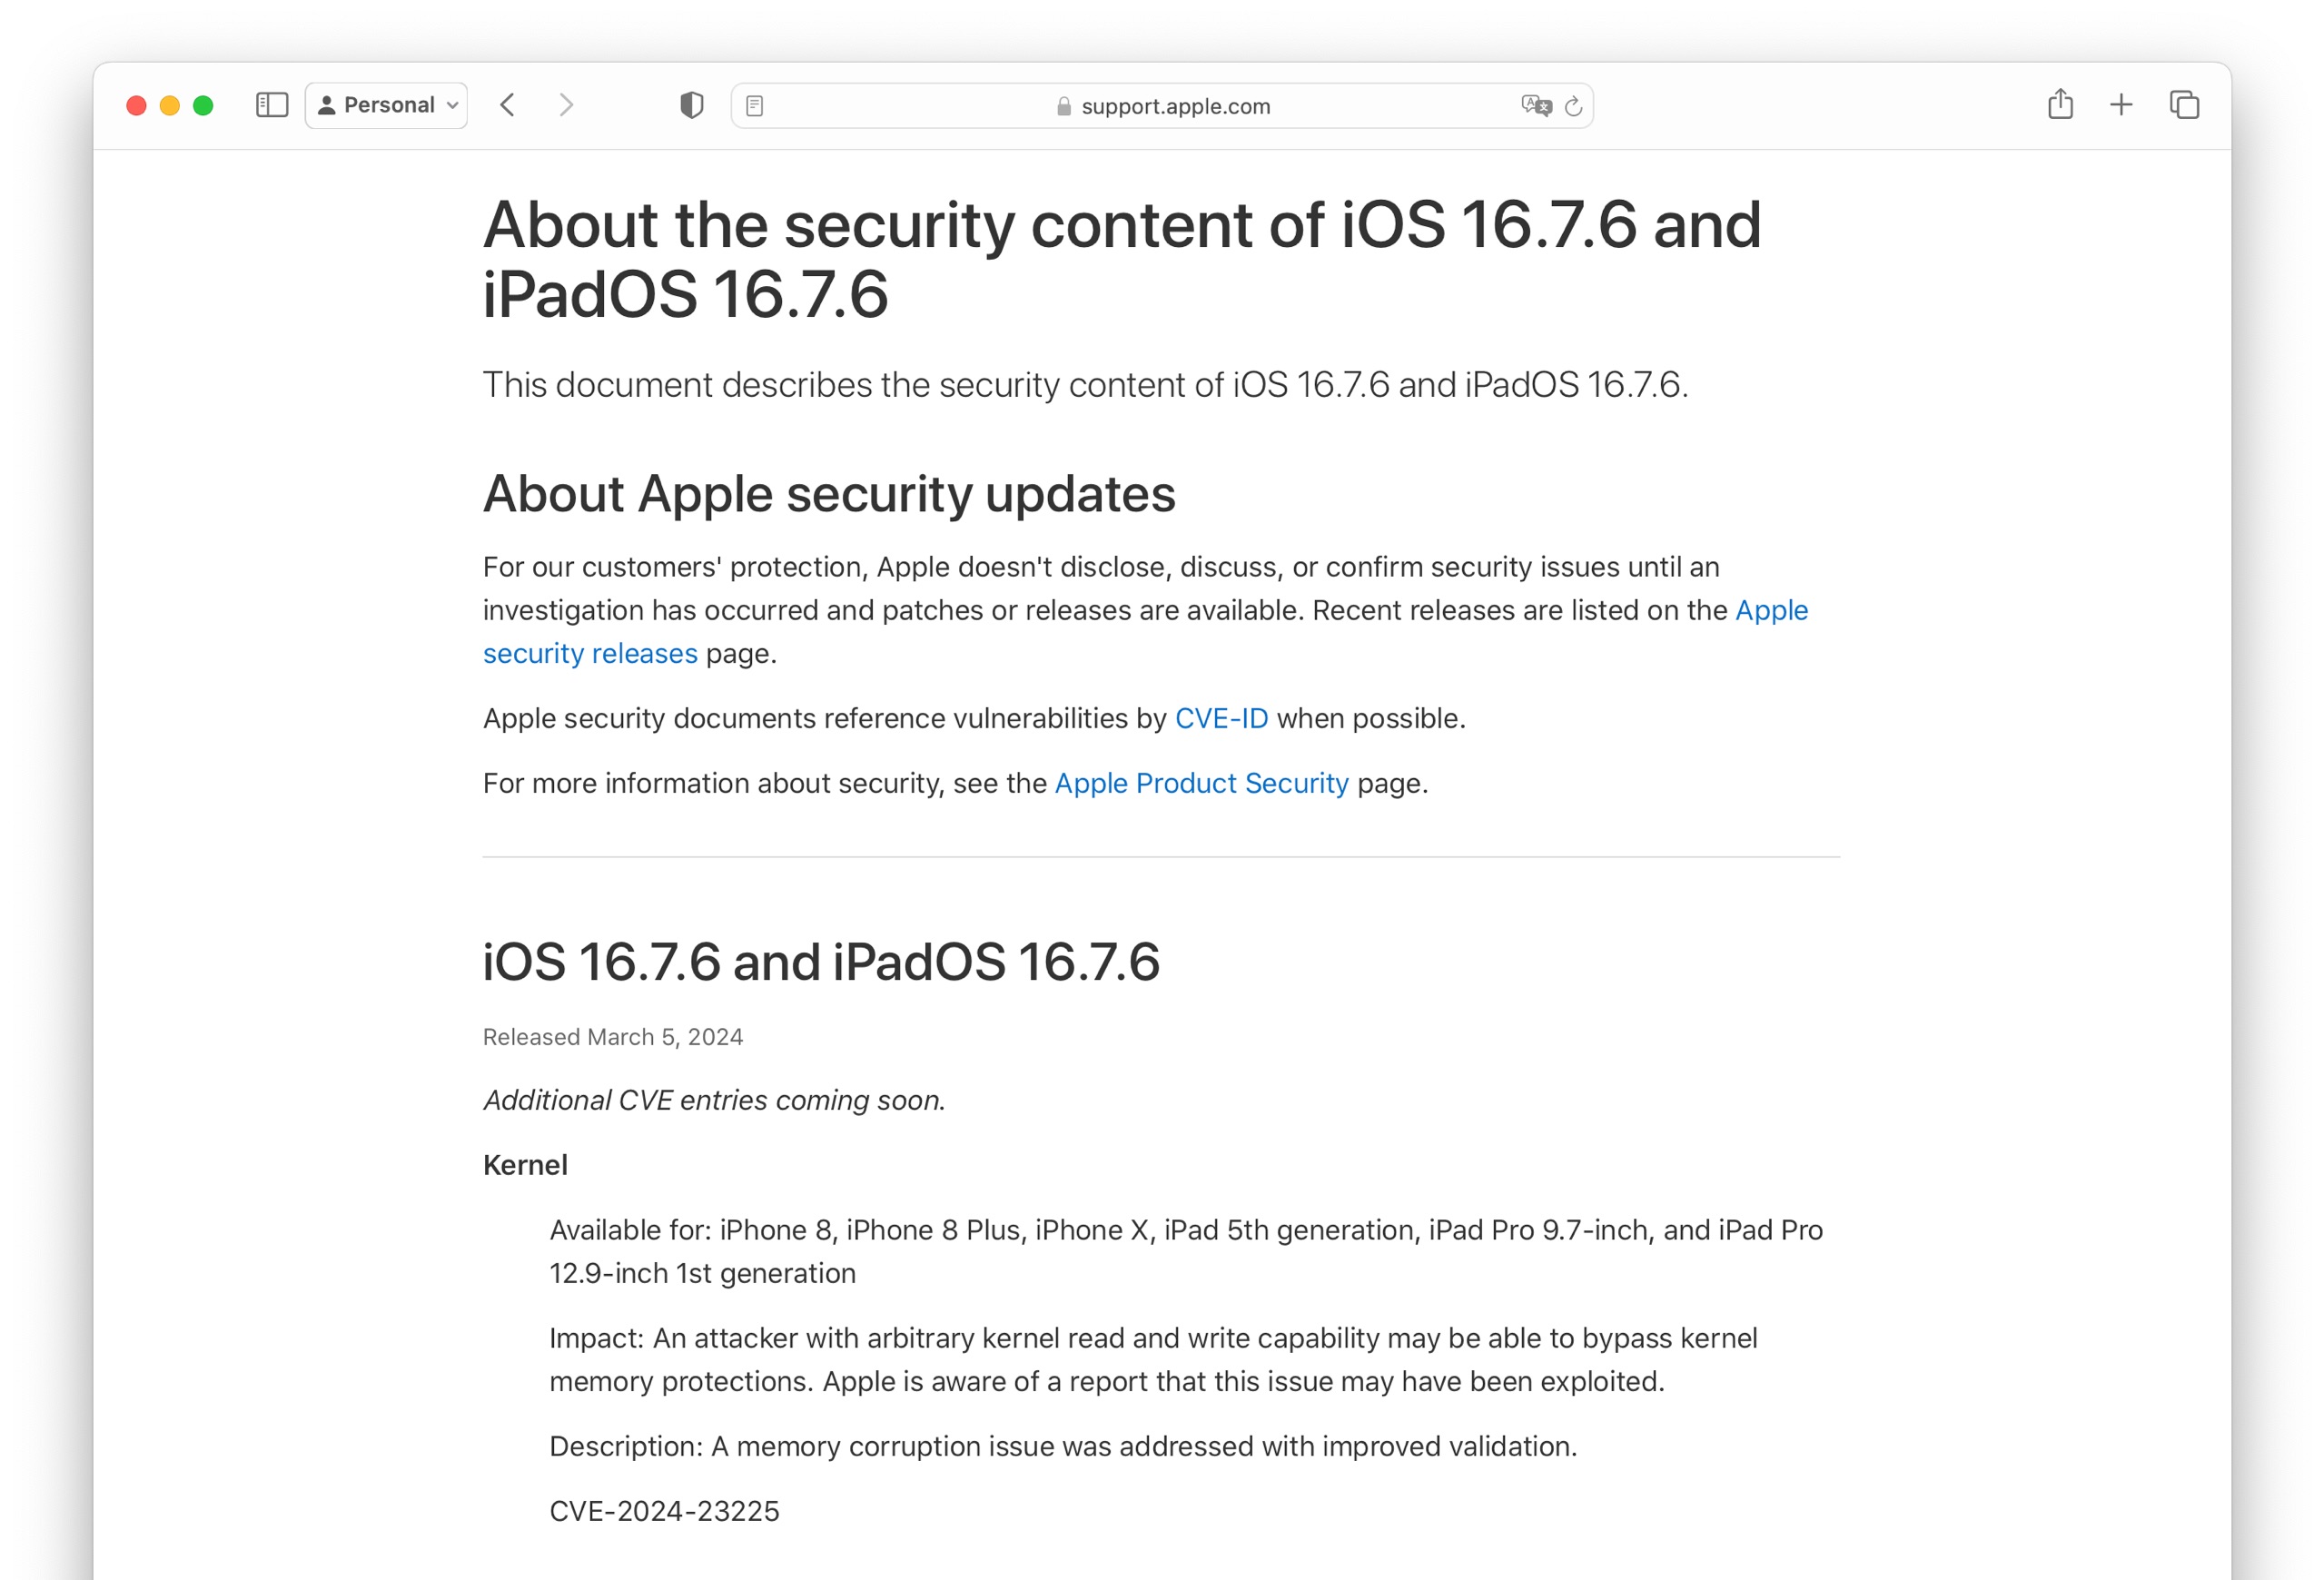 About the security content of iOS 16.7.6 and iPadOS 16.7.6